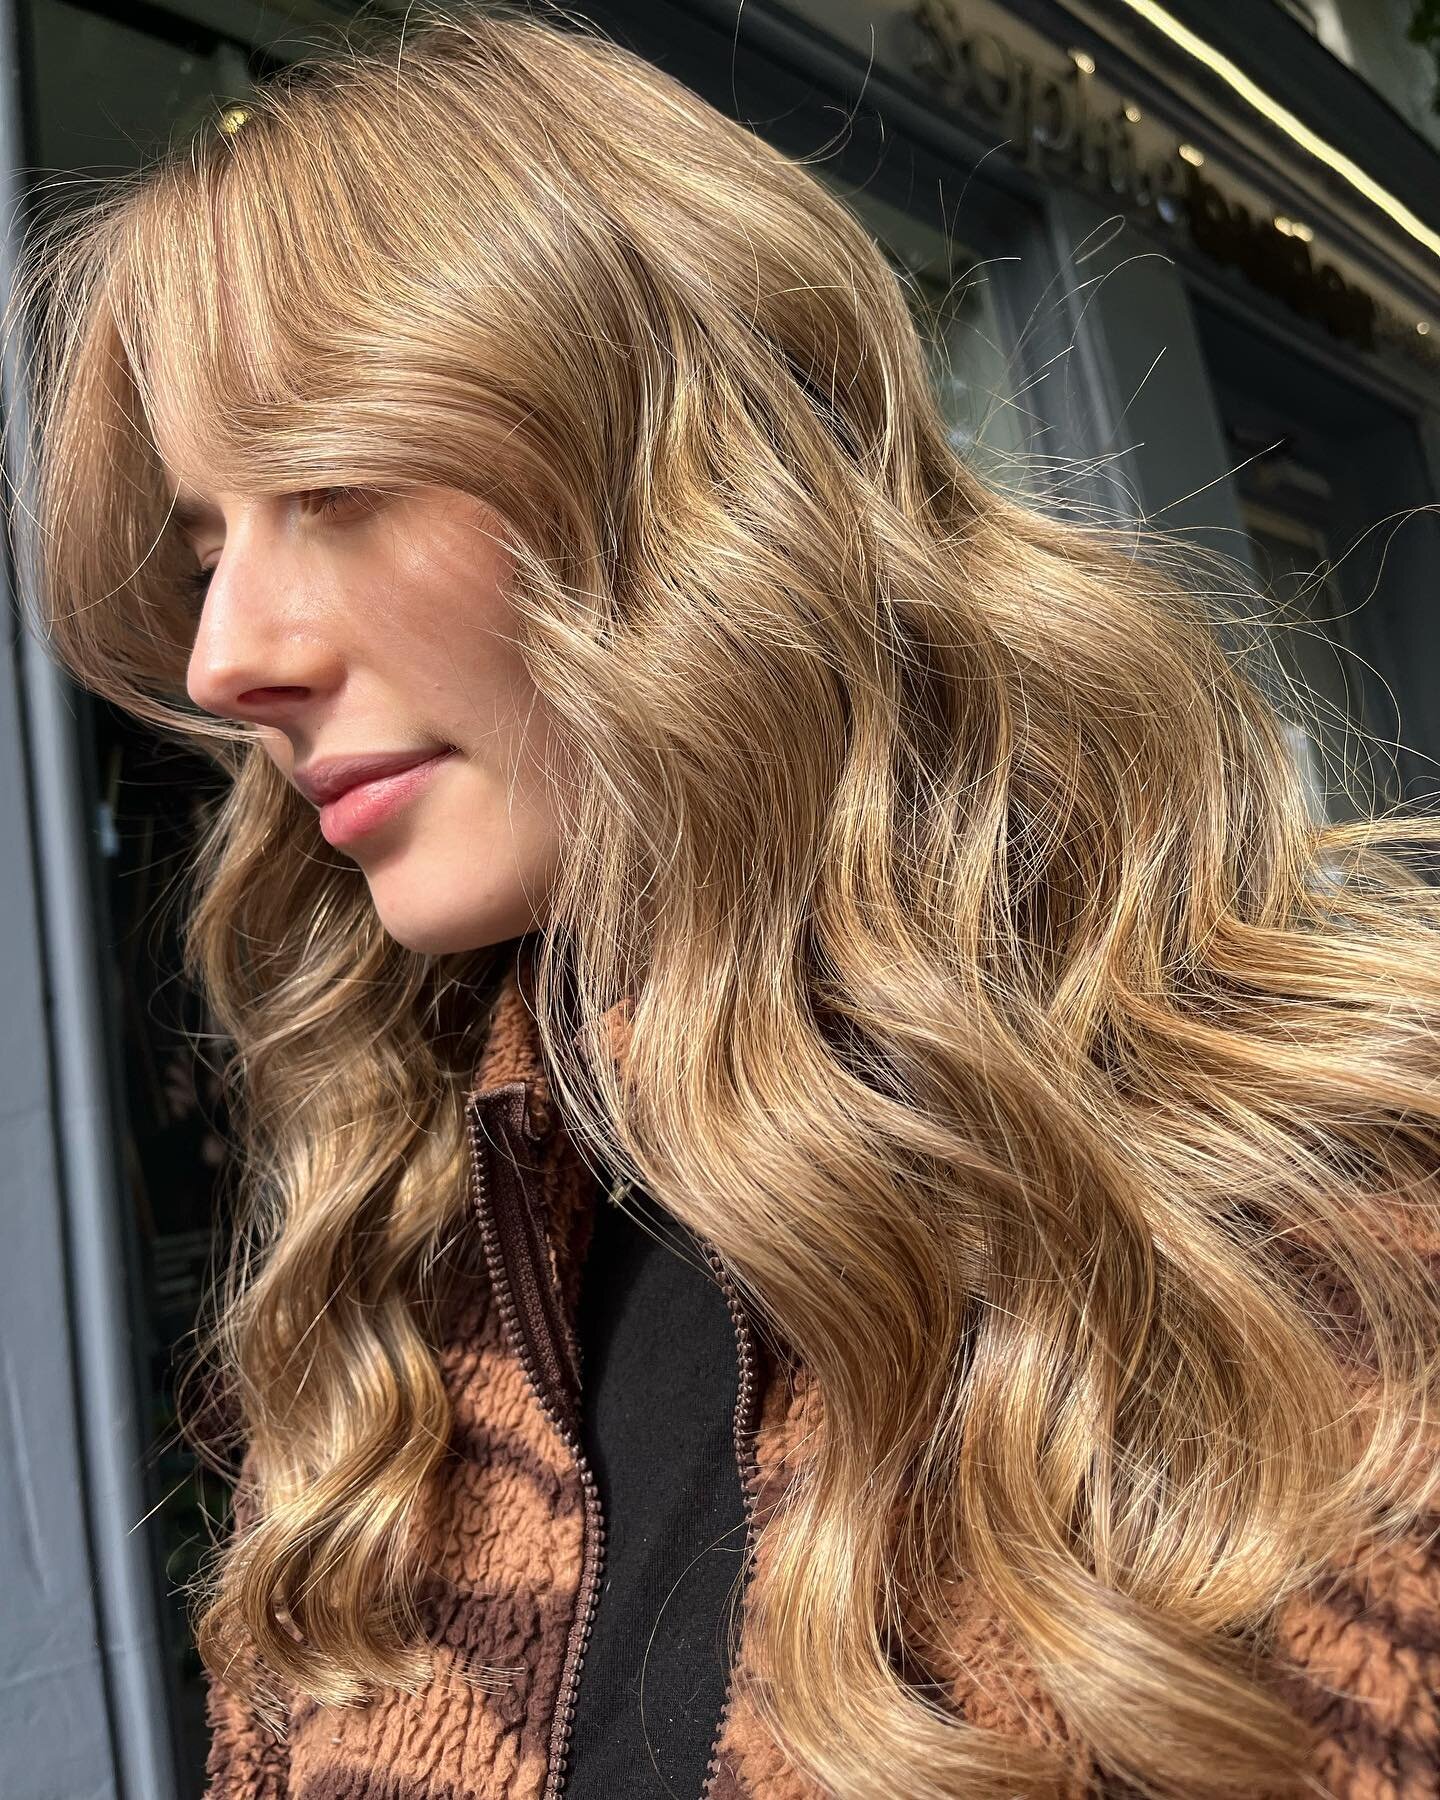 Soft buttery blonde, a natural colour change to brighten up for summer&hellip;

#wella #wellahair #wellahairuk #hairdressing #standrews #salon #stylist #colourtransformation #wellalife #ghd #balayage #hairtransformation #blondorwella #wellacolor #wel